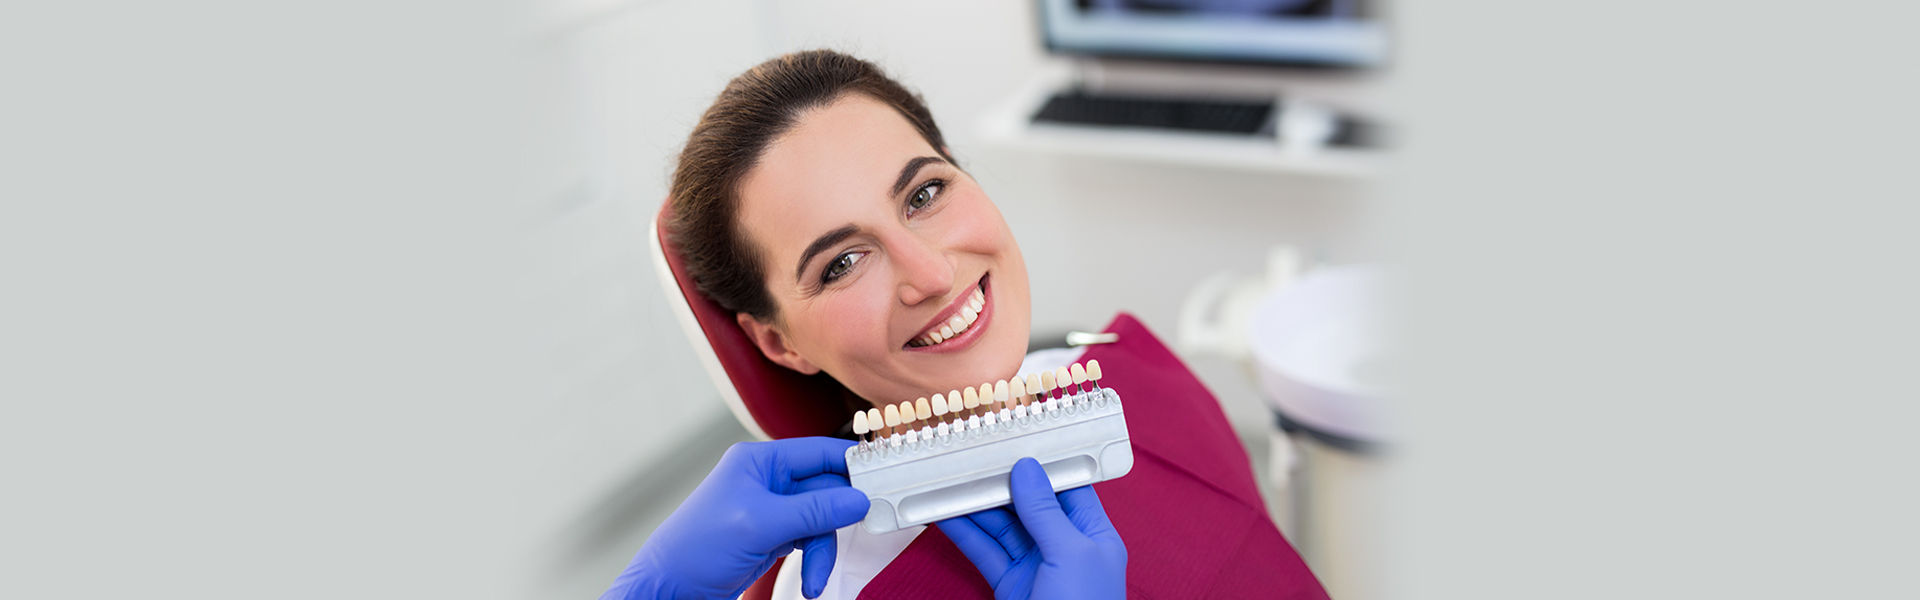 Tips For Maintaining Dental Veneers for Long-Lasting Results